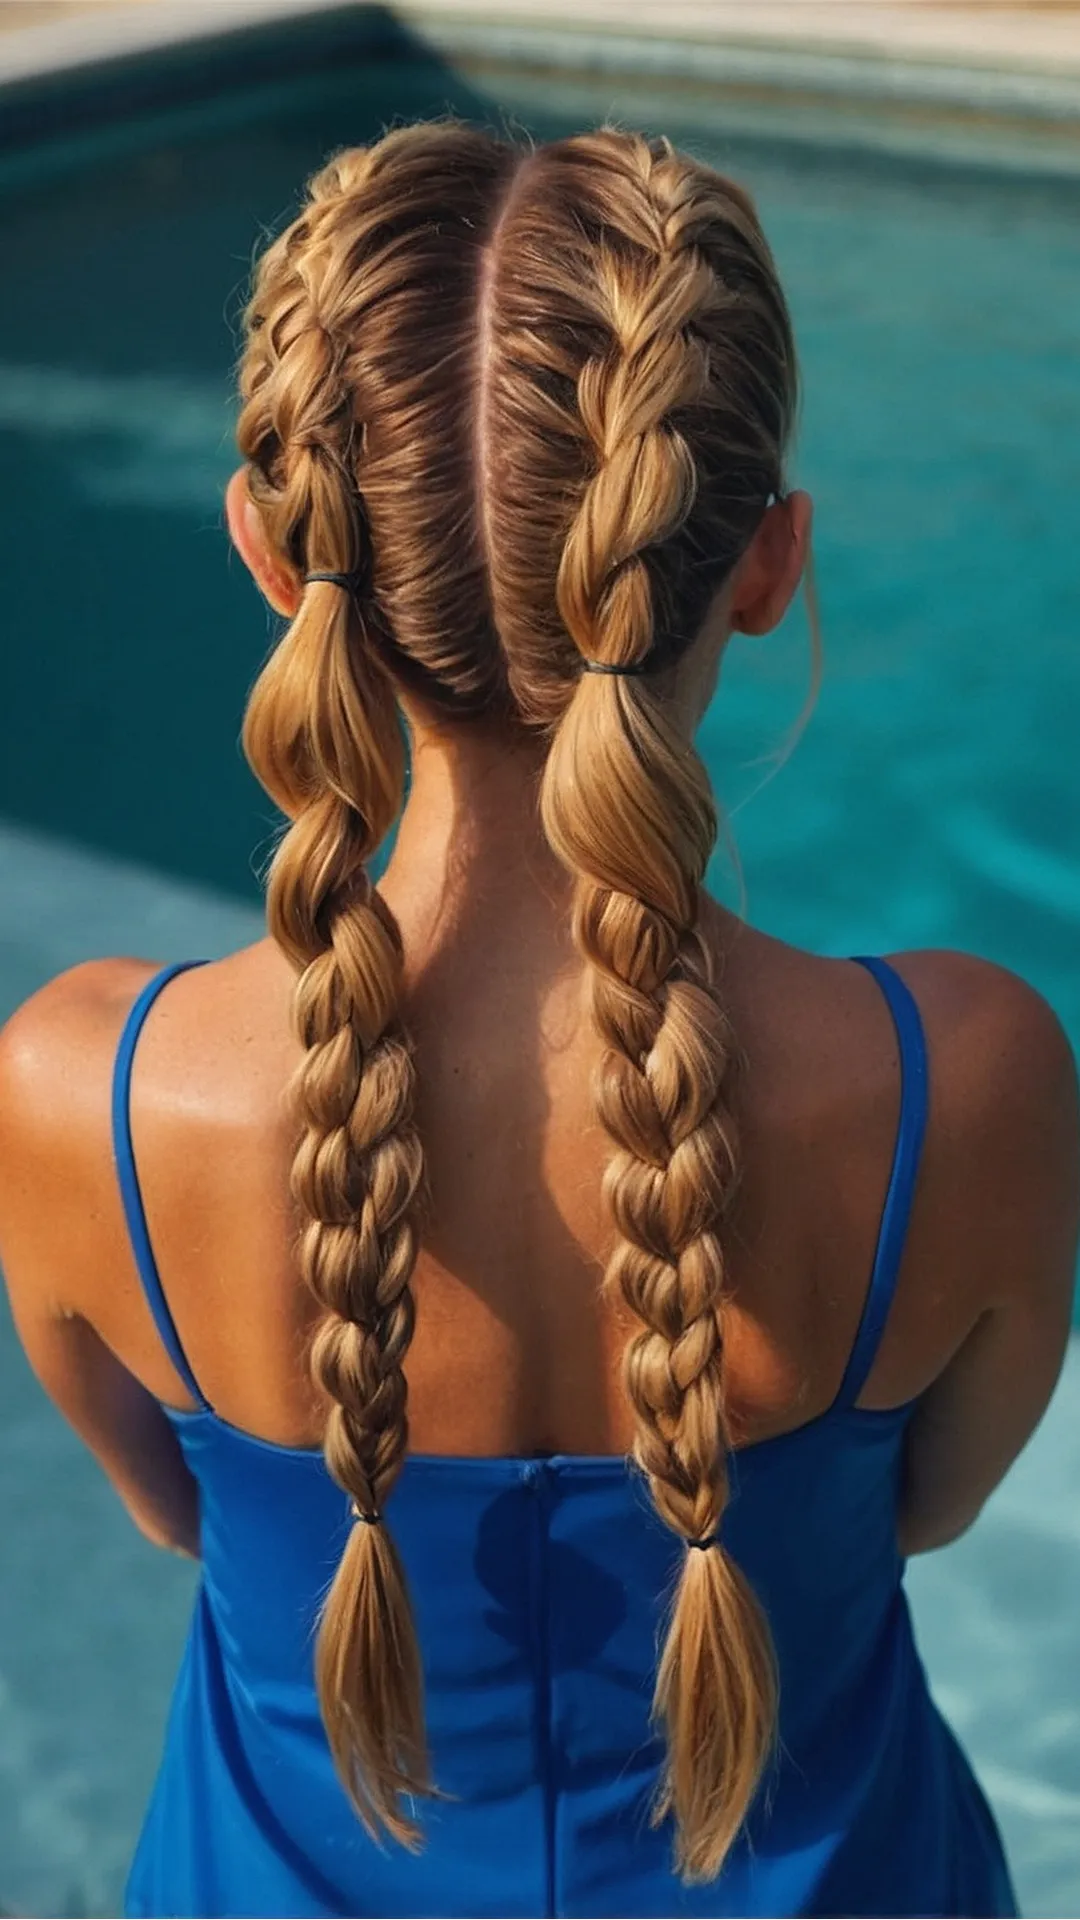 From Pool to Party: Hair Ideas for Summer Soirees